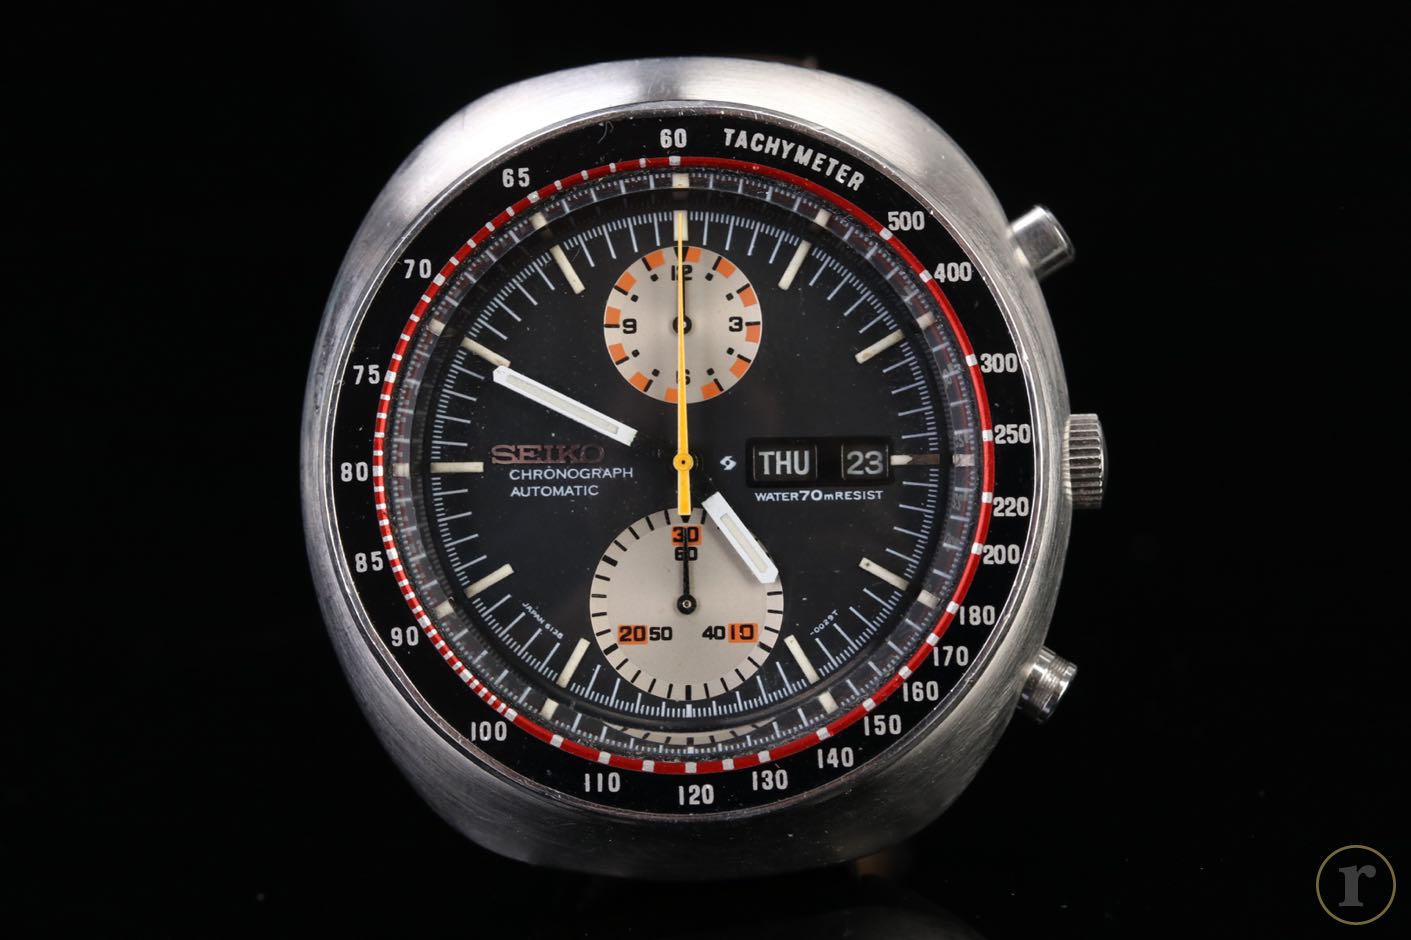 Seiko - Chronograph Automatic from the 70s/80s | DISCOVER GENUINE  MILITARIA, ANTIQUES & COINS - ratisbon's